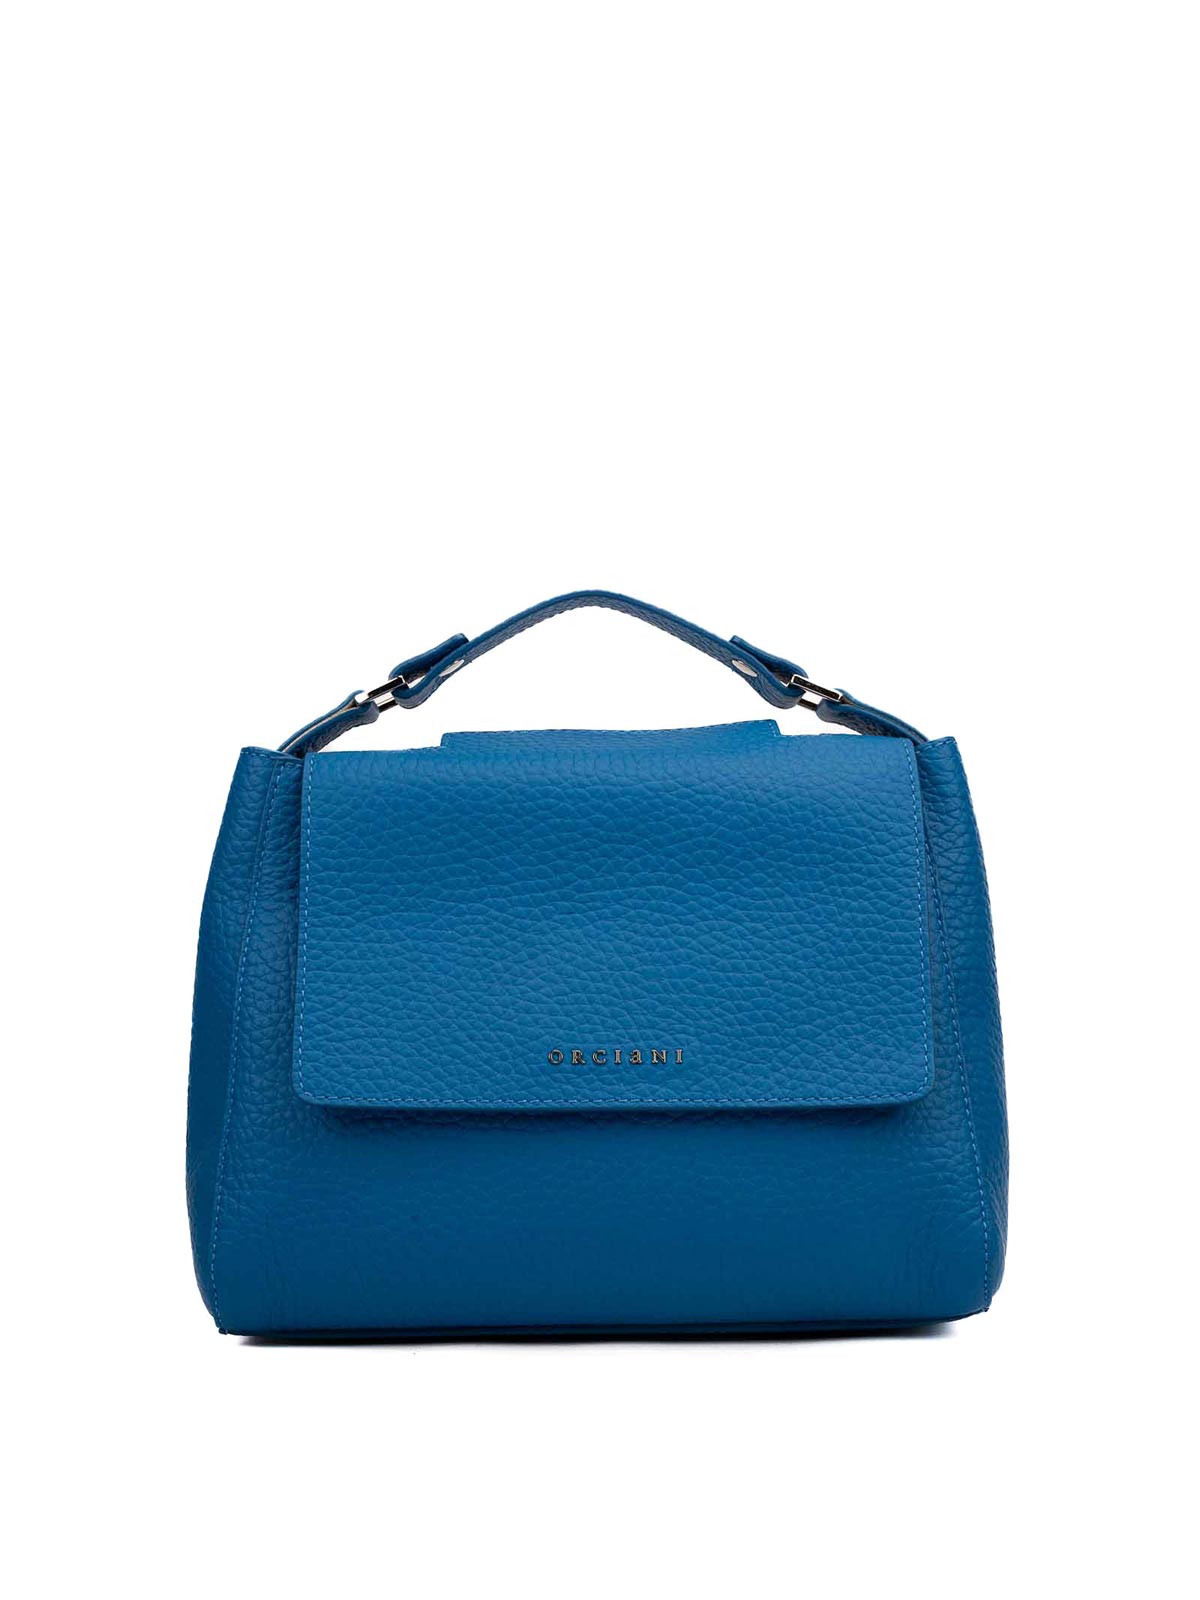 Orciani Leather Bag In Blue